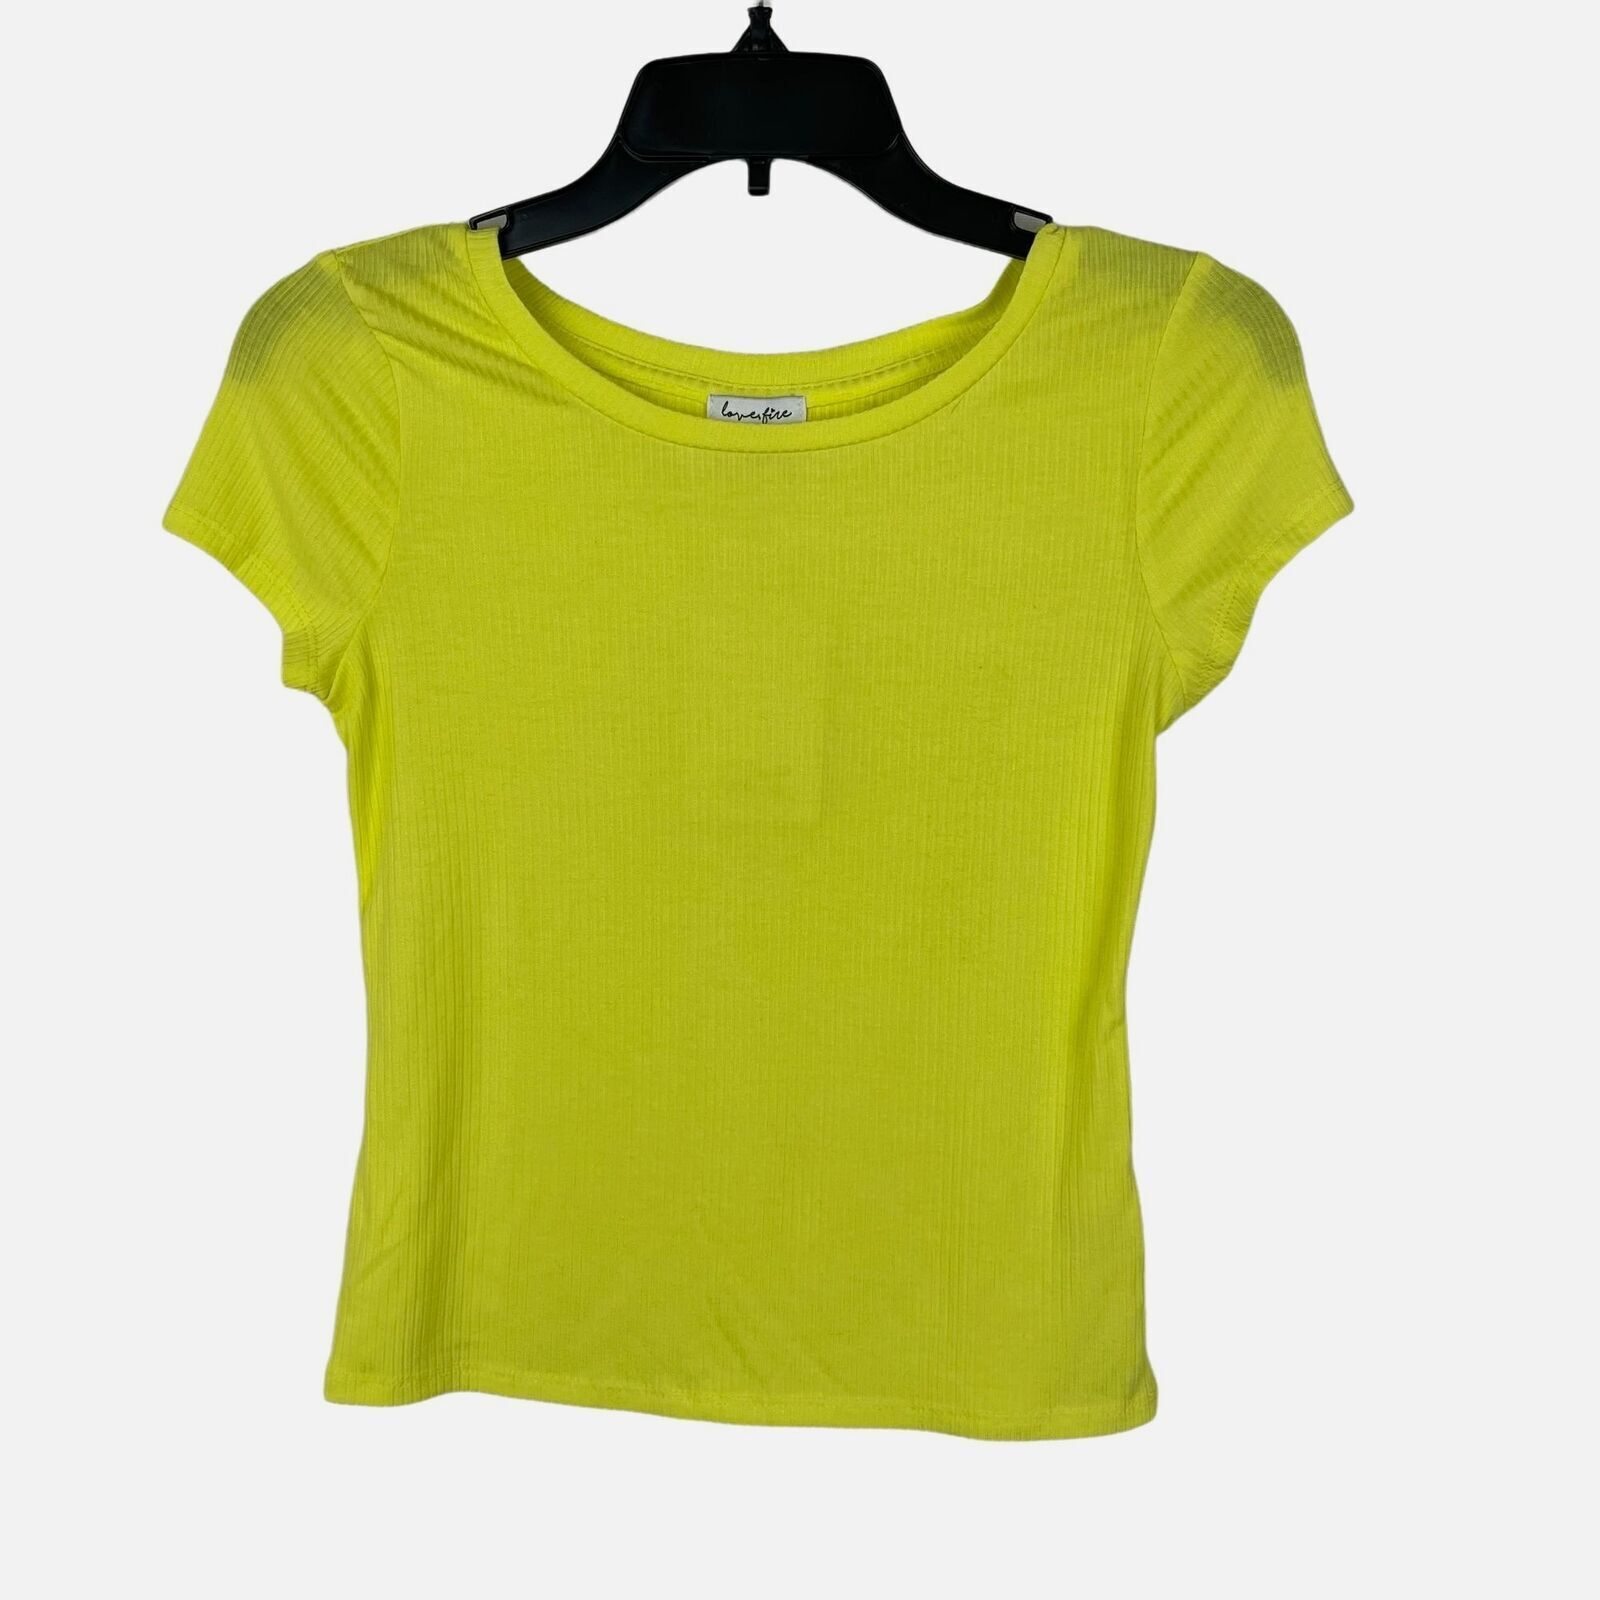 Love Fire Girls Yellow Crewneck Ribbed Stretch T-shirt Size L